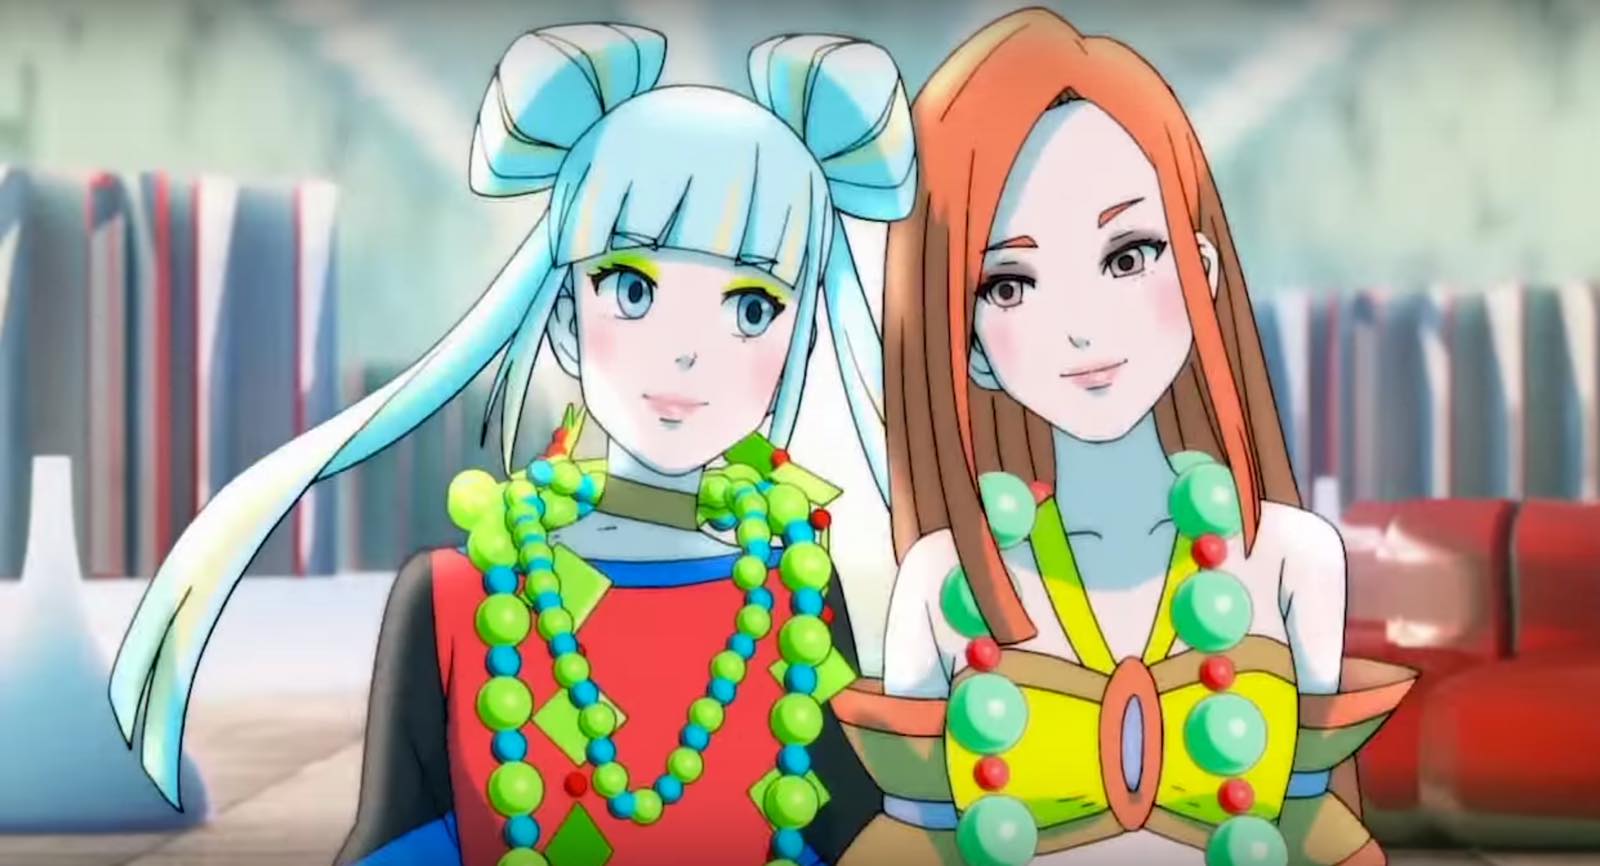 Ultimate Diva Collaboration? Namie Amuro and Hatsune Miku Rock Neo Tokyo in the MV for “B Who I Want 2 B”!